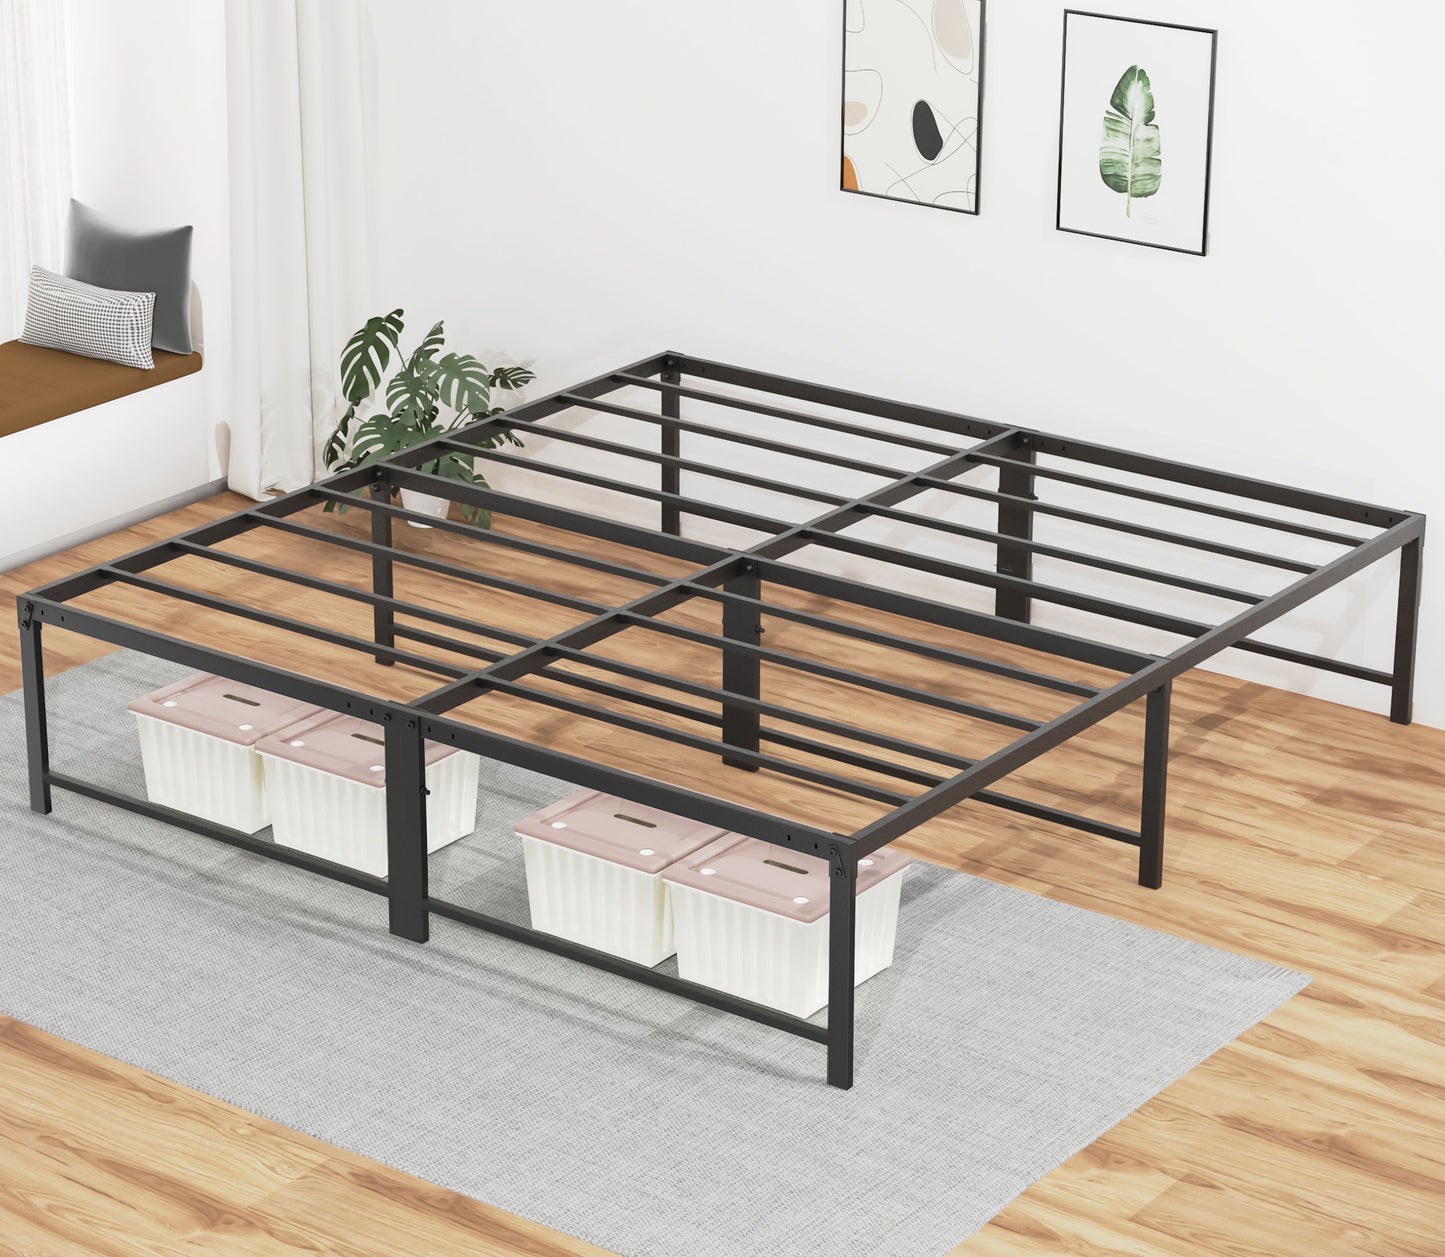 Nefoso Bed Frame, 18 inch Heavy Duty Metal Platform Bed Frame, No Box Spring Needed